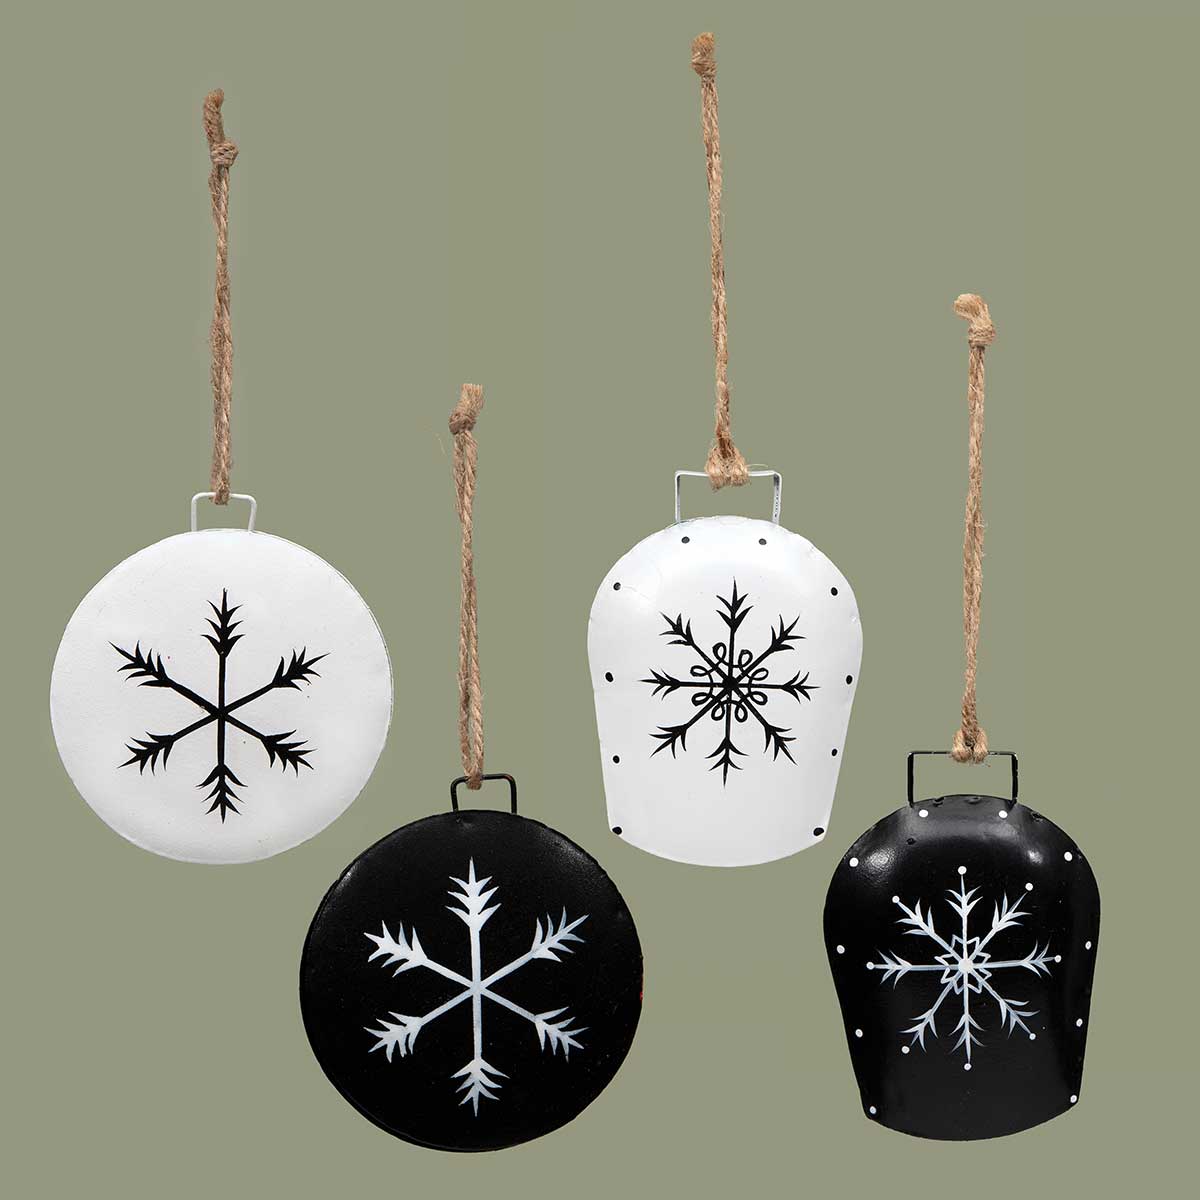 ORNAMENT BELL 2 ASSORTED 2.5IN X 1IN X 3.5IN BLACK/WHITE METAL